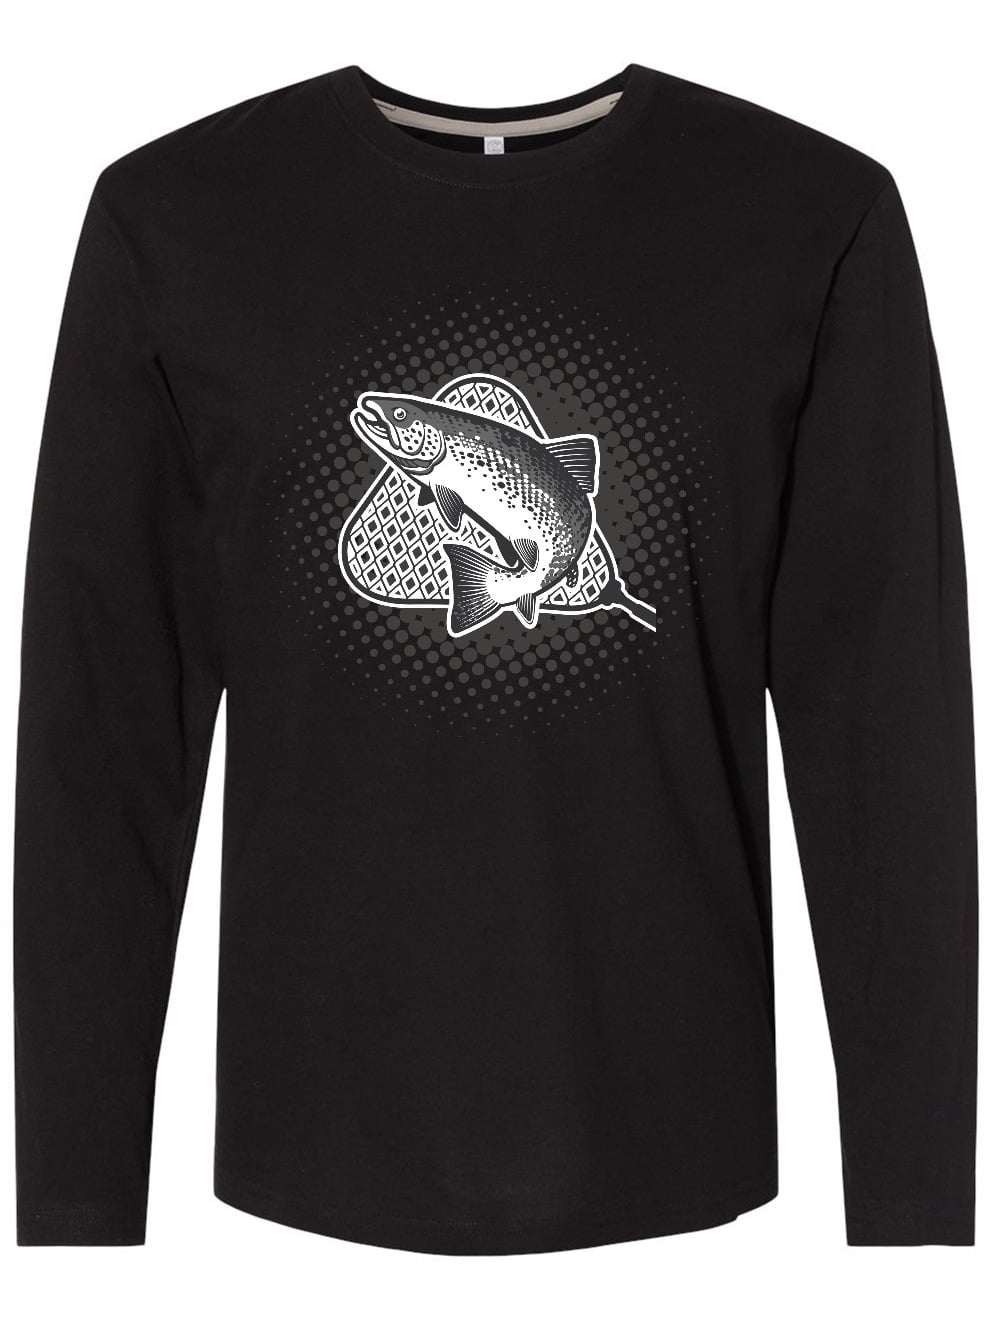 Inktastic Trout Fisherman Fly Fishing Youth T-Shirt